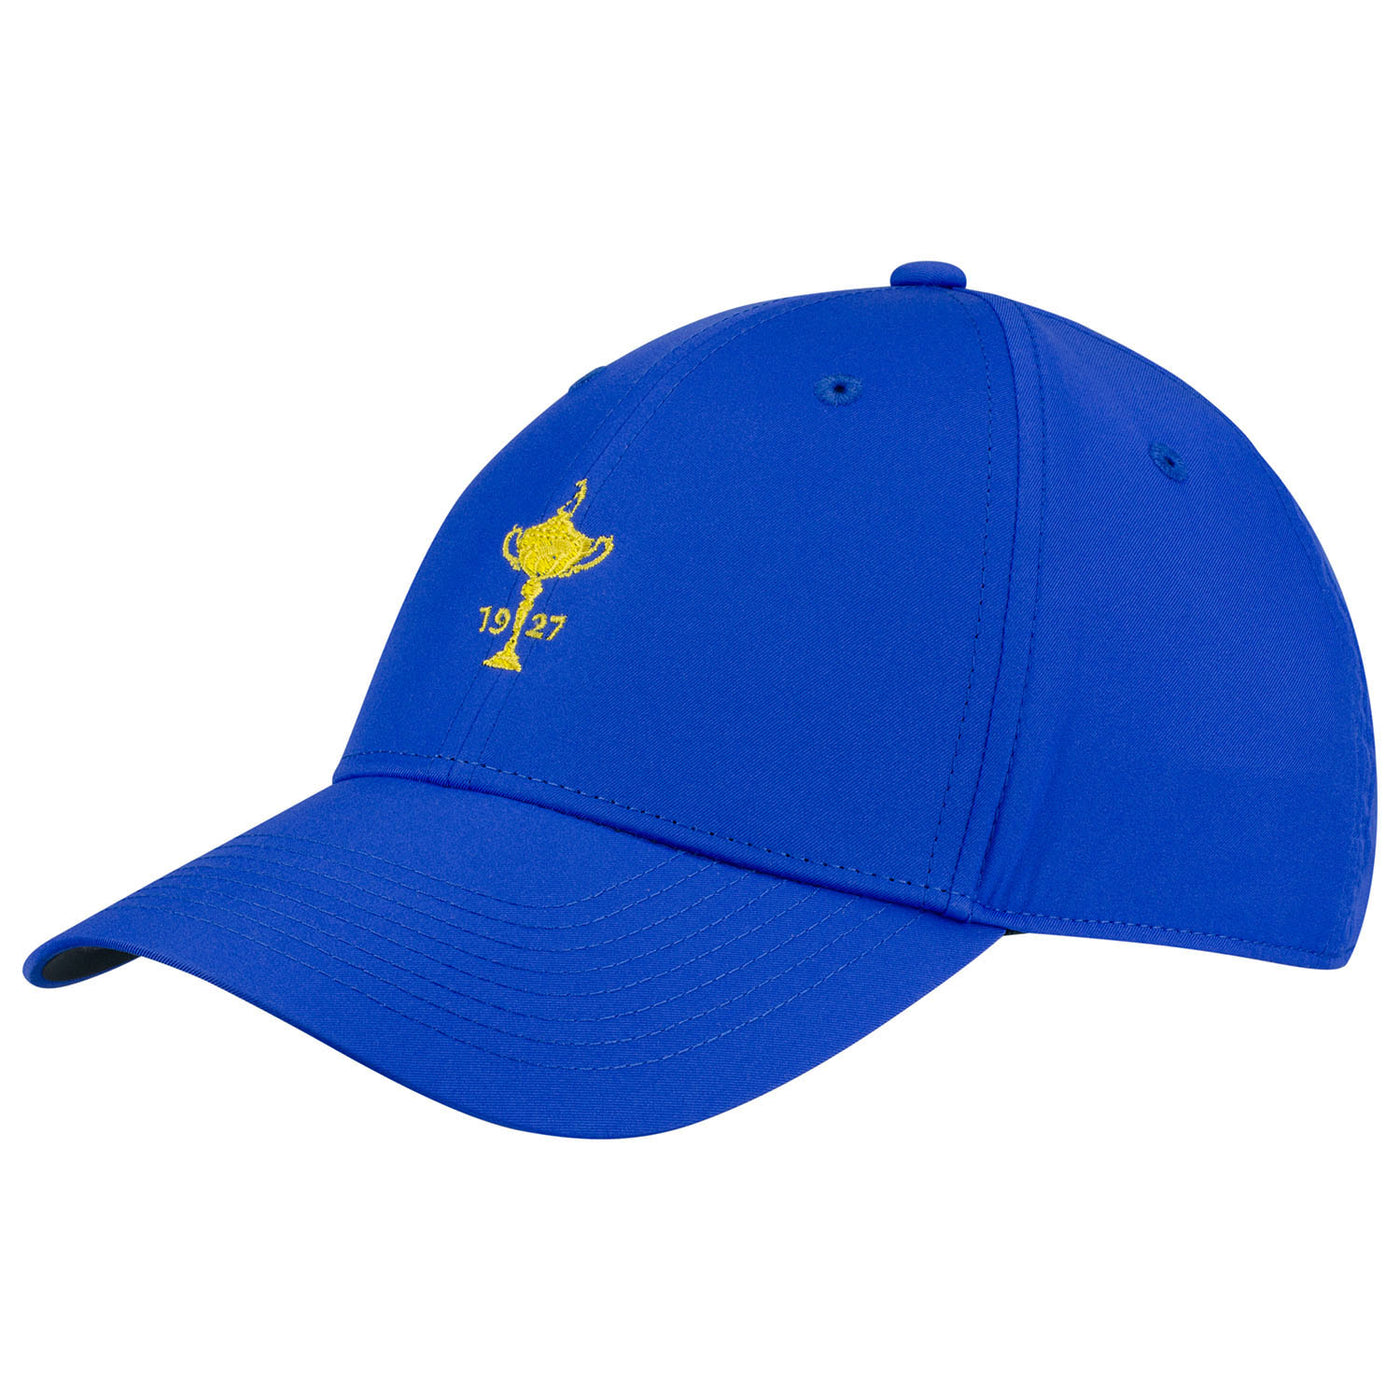 Ryder Cup Hats For Sale The Official US Ryder Cup Shop